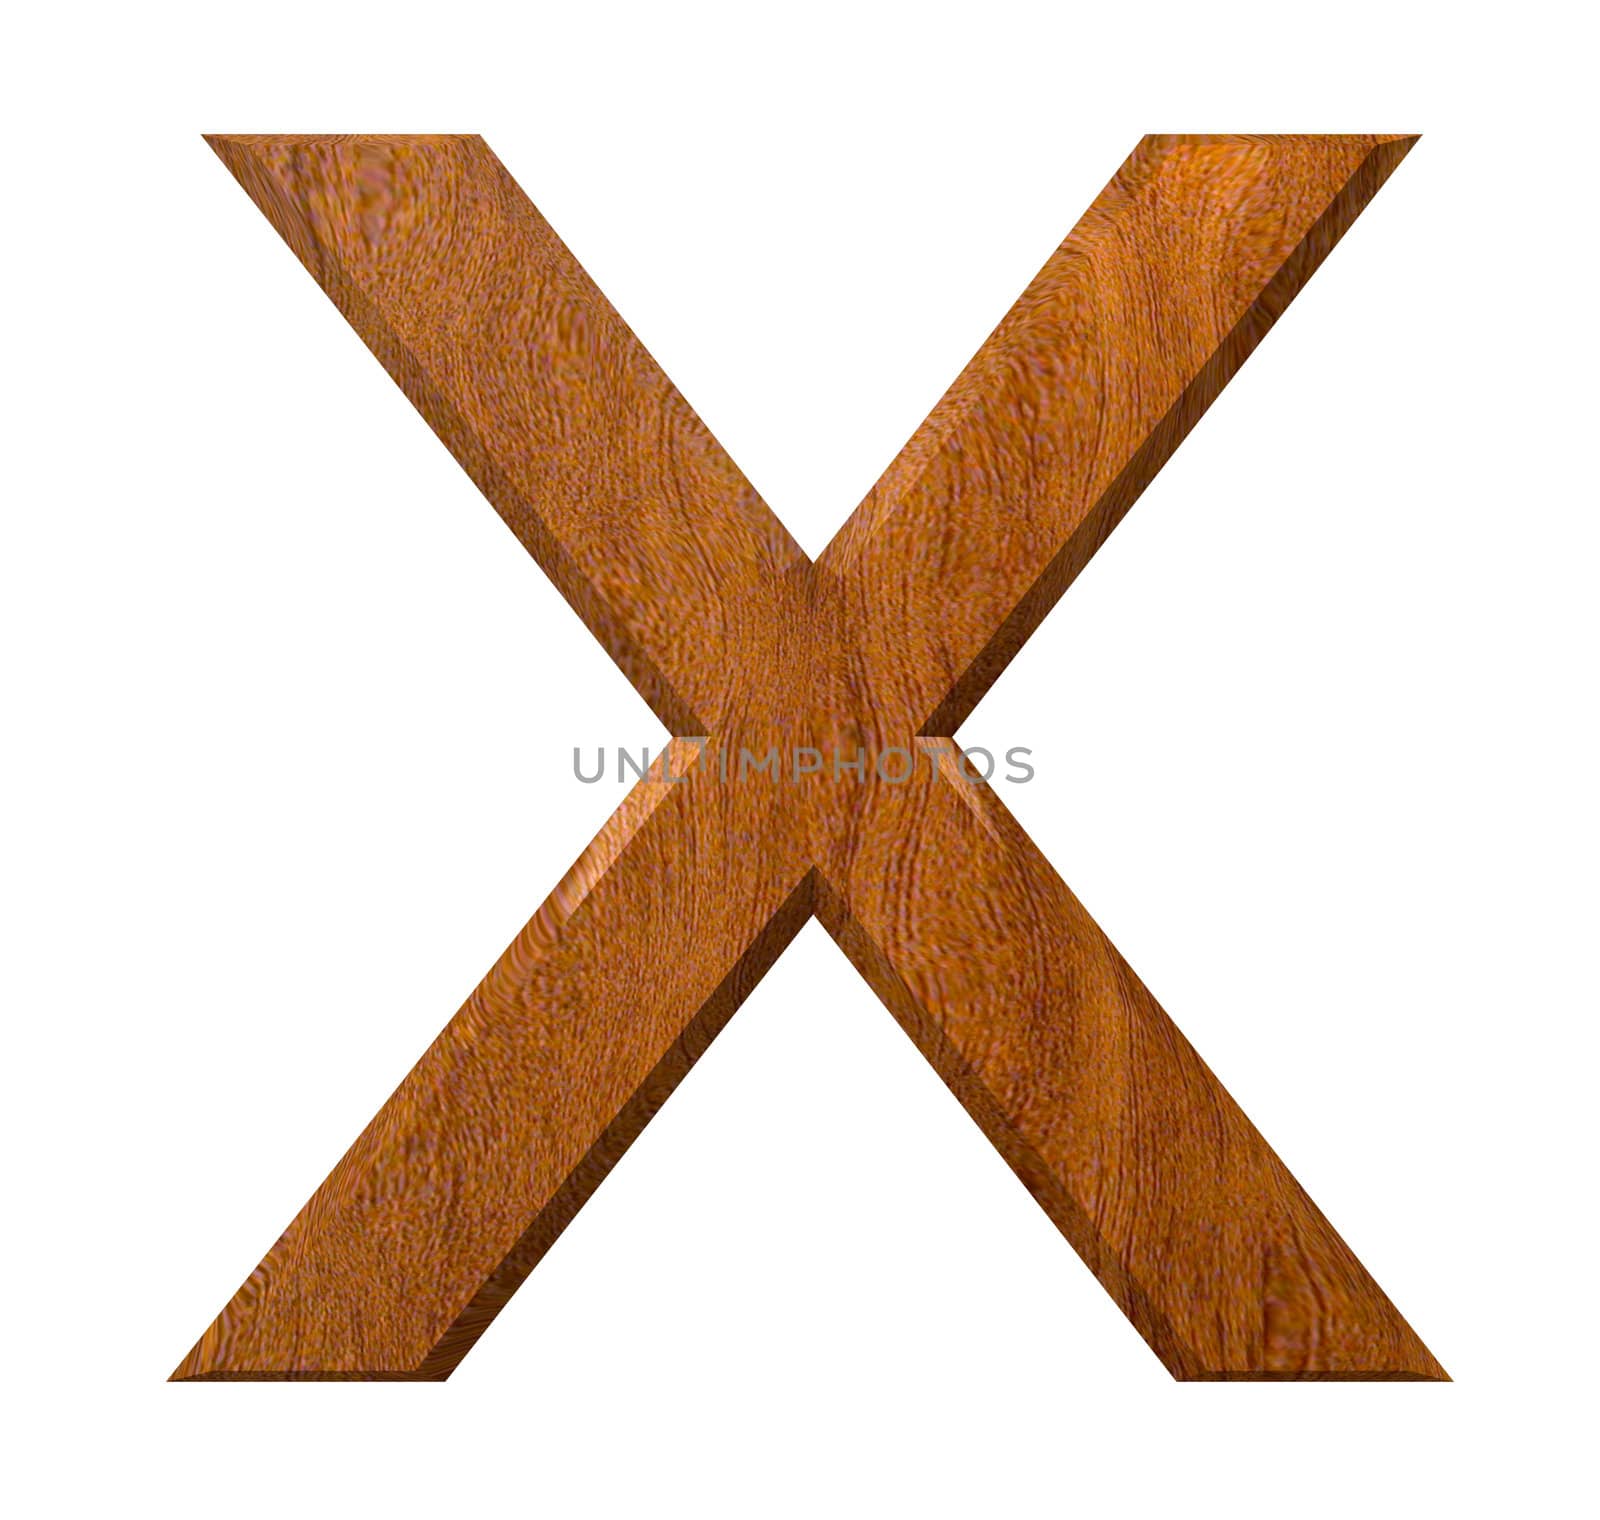 3d letter X in wood - 3d made